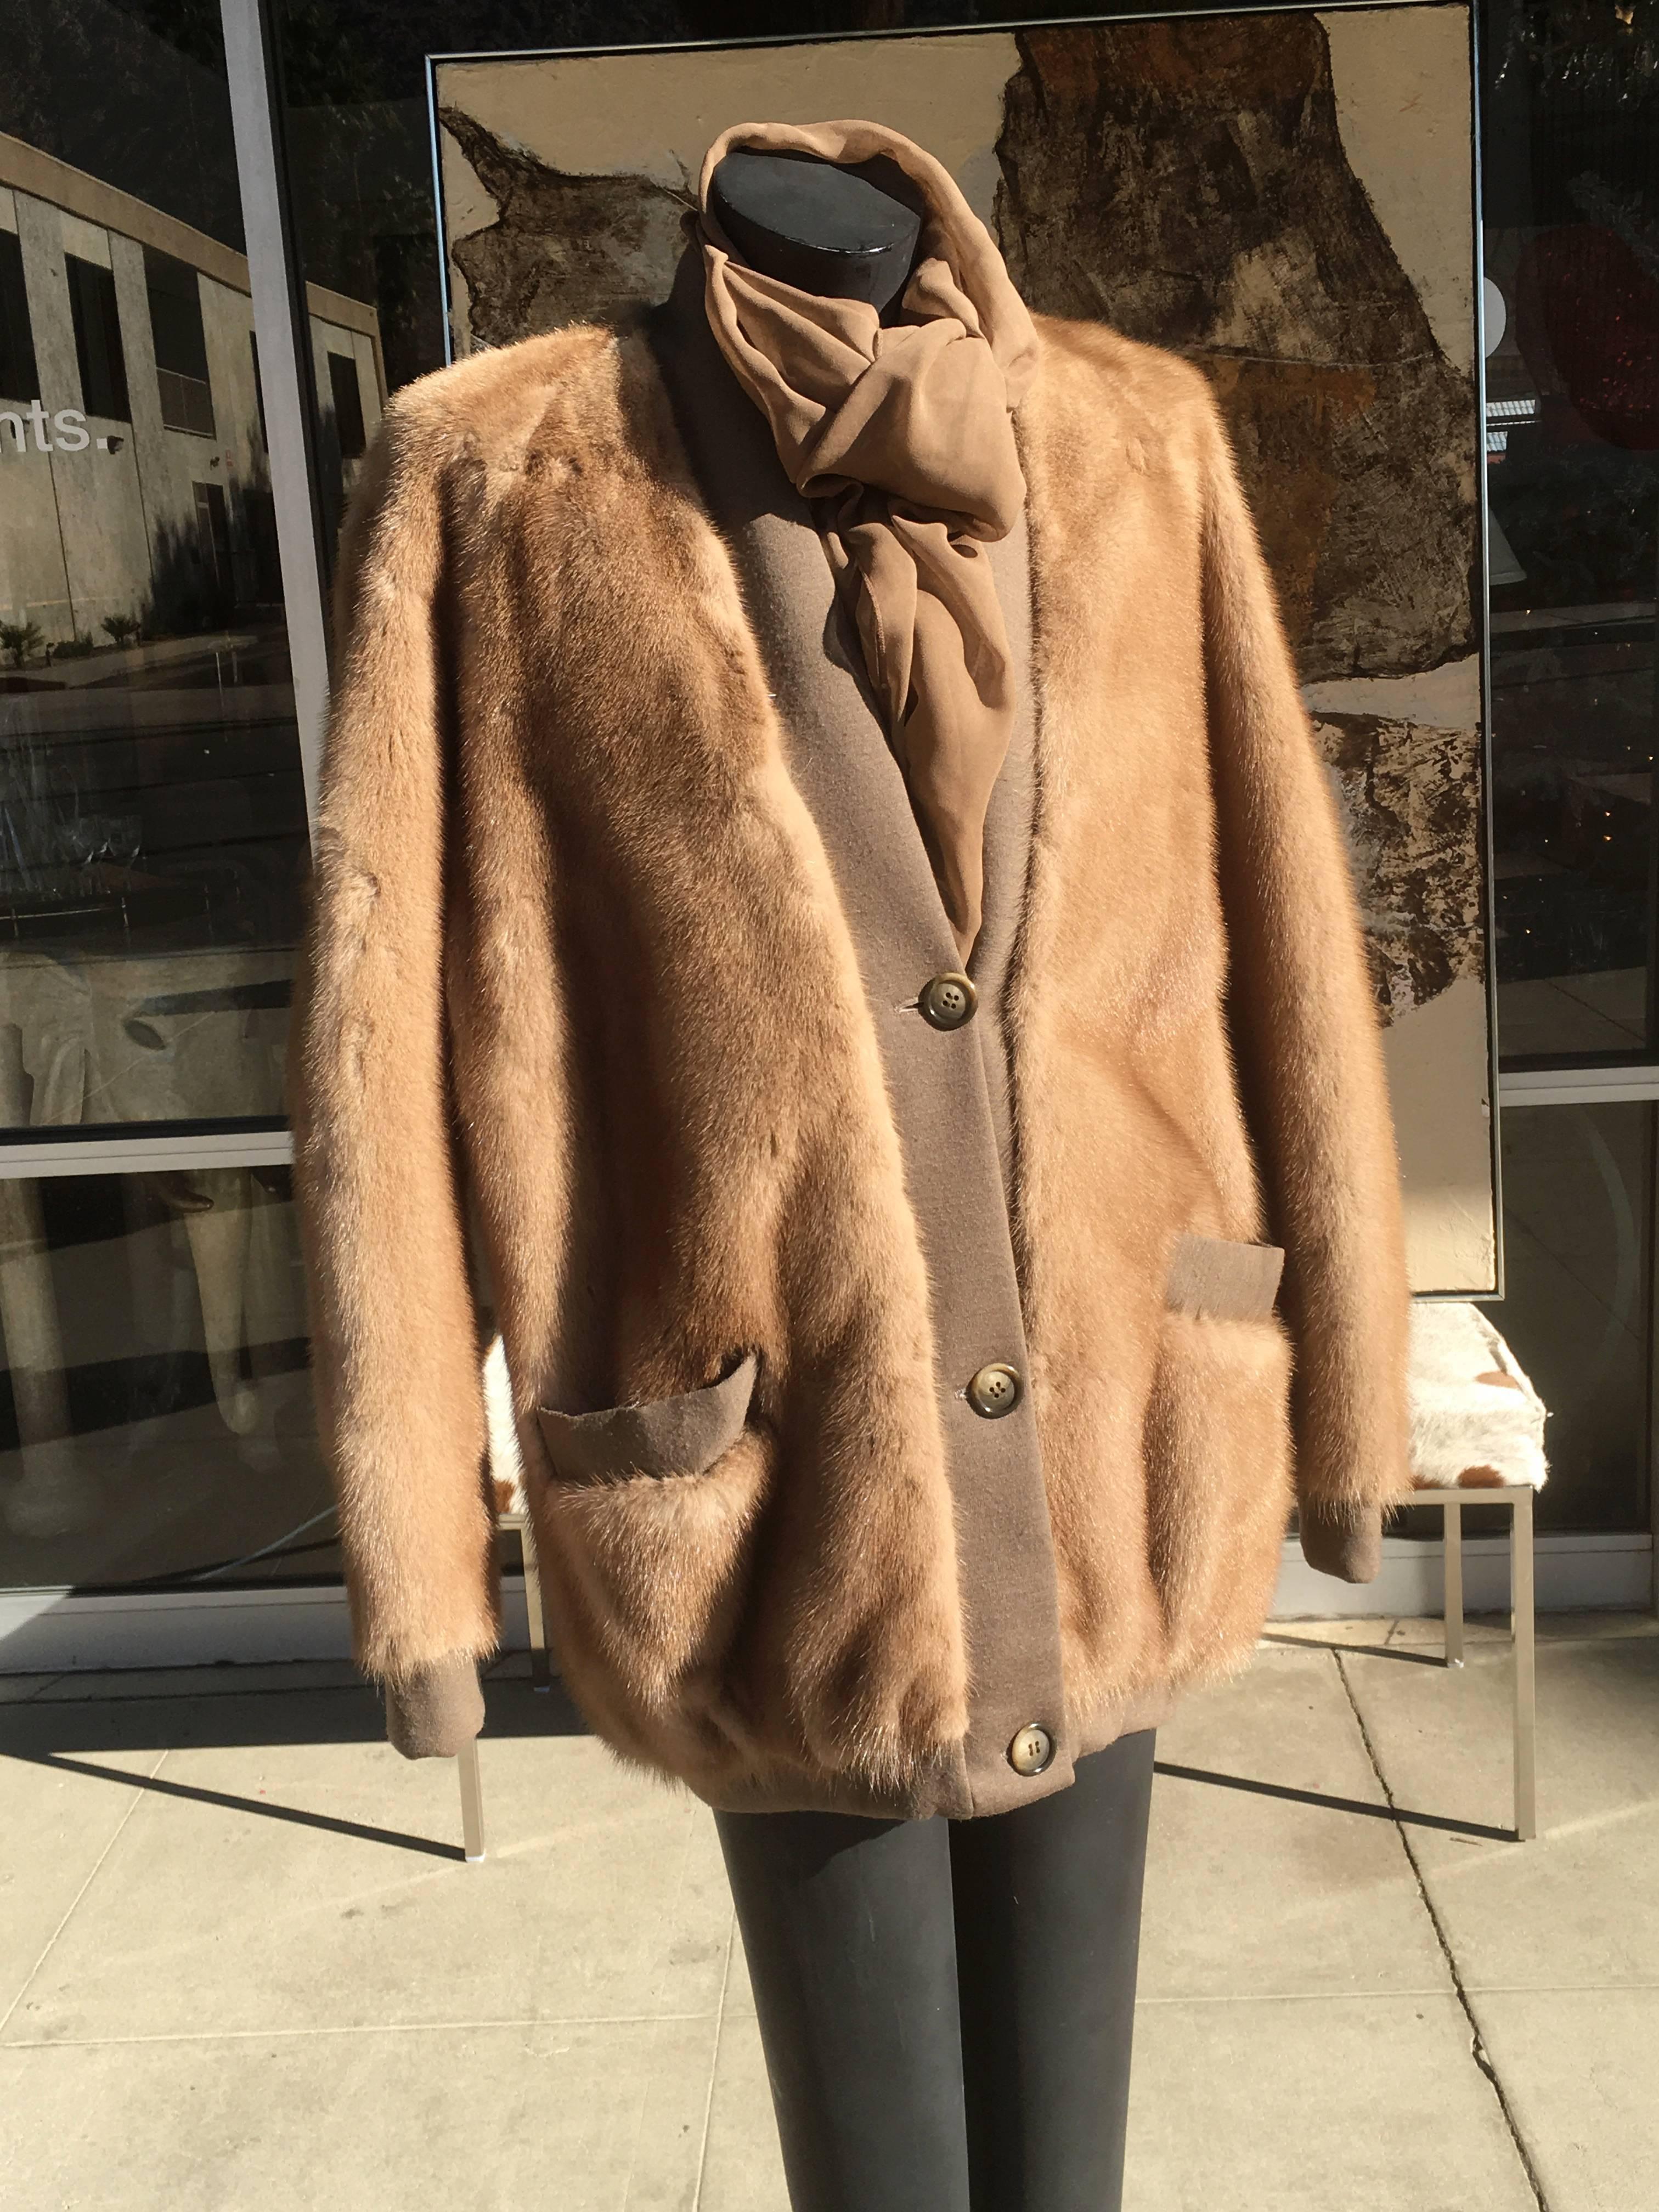 A uber chic mink cardigan jacket from the 1970s. In excellent original condition. This mink jacket, designed by Balmain is as chic and modern as when it was designed. Knit trim on pockets and placket trim. Purchased in I Magnin Beverly Hills. 